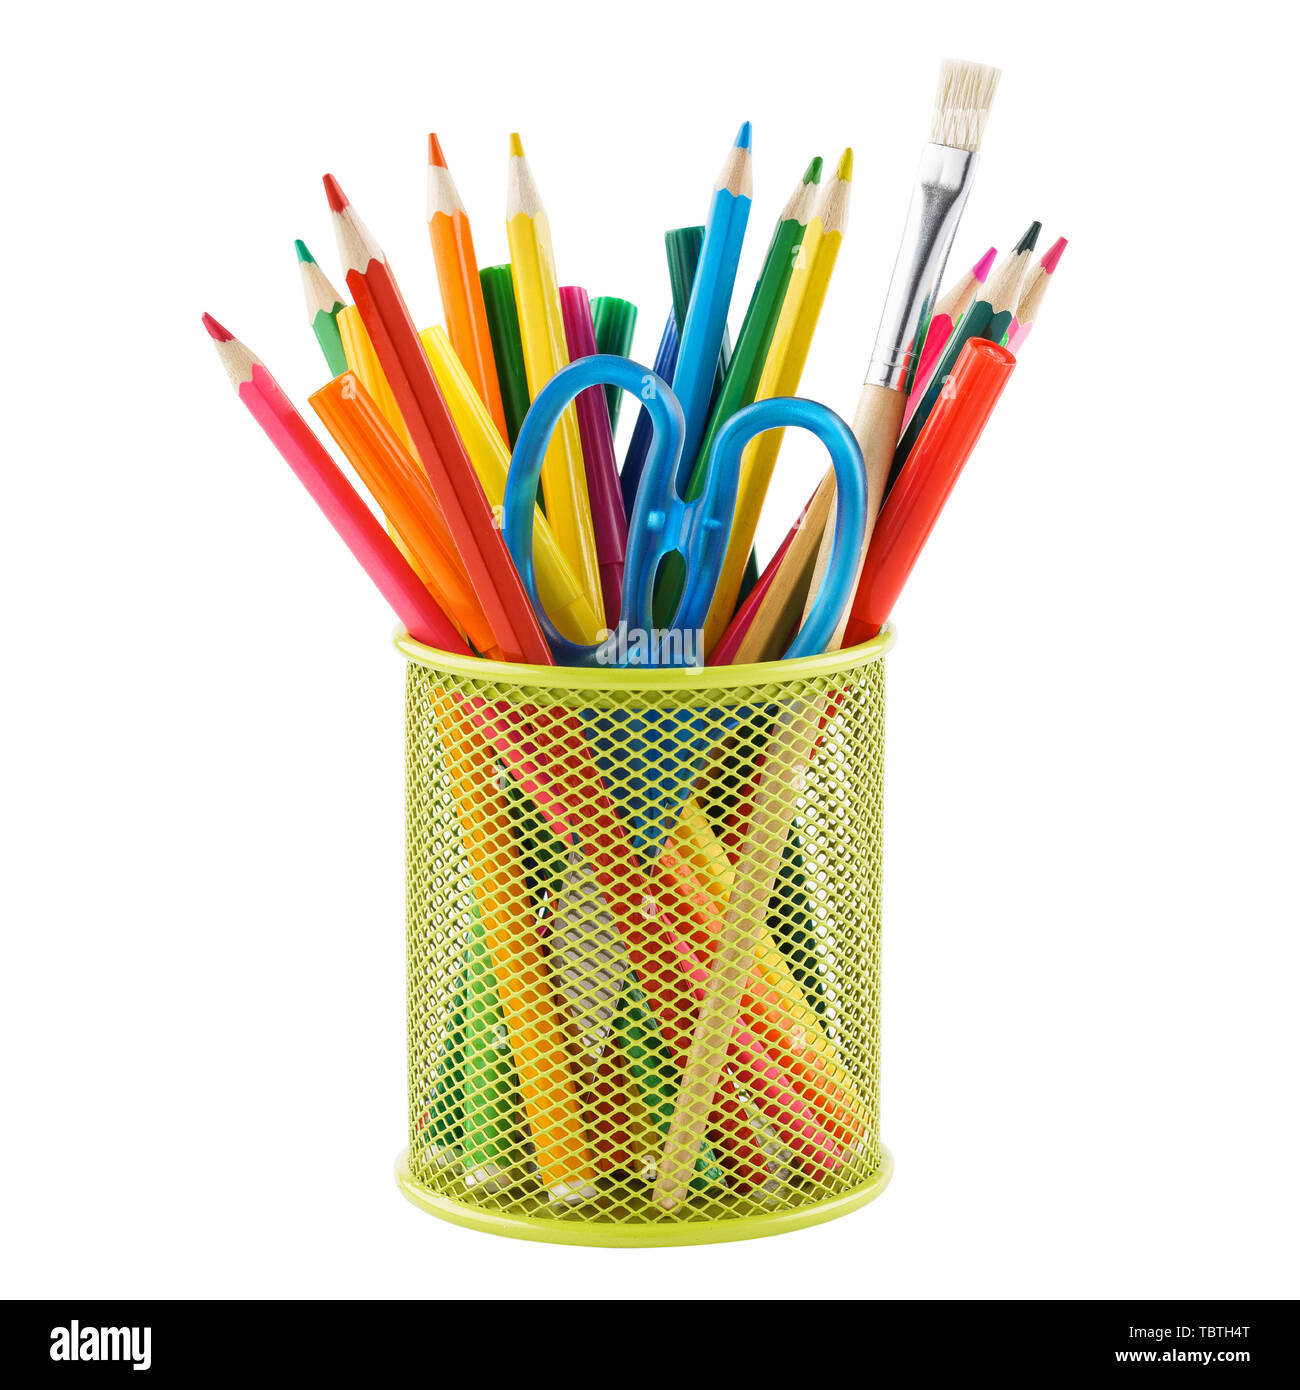 Colored pencils and various colorful stationery for school in a metal holder or cup. Isolated on white. Stock Photo